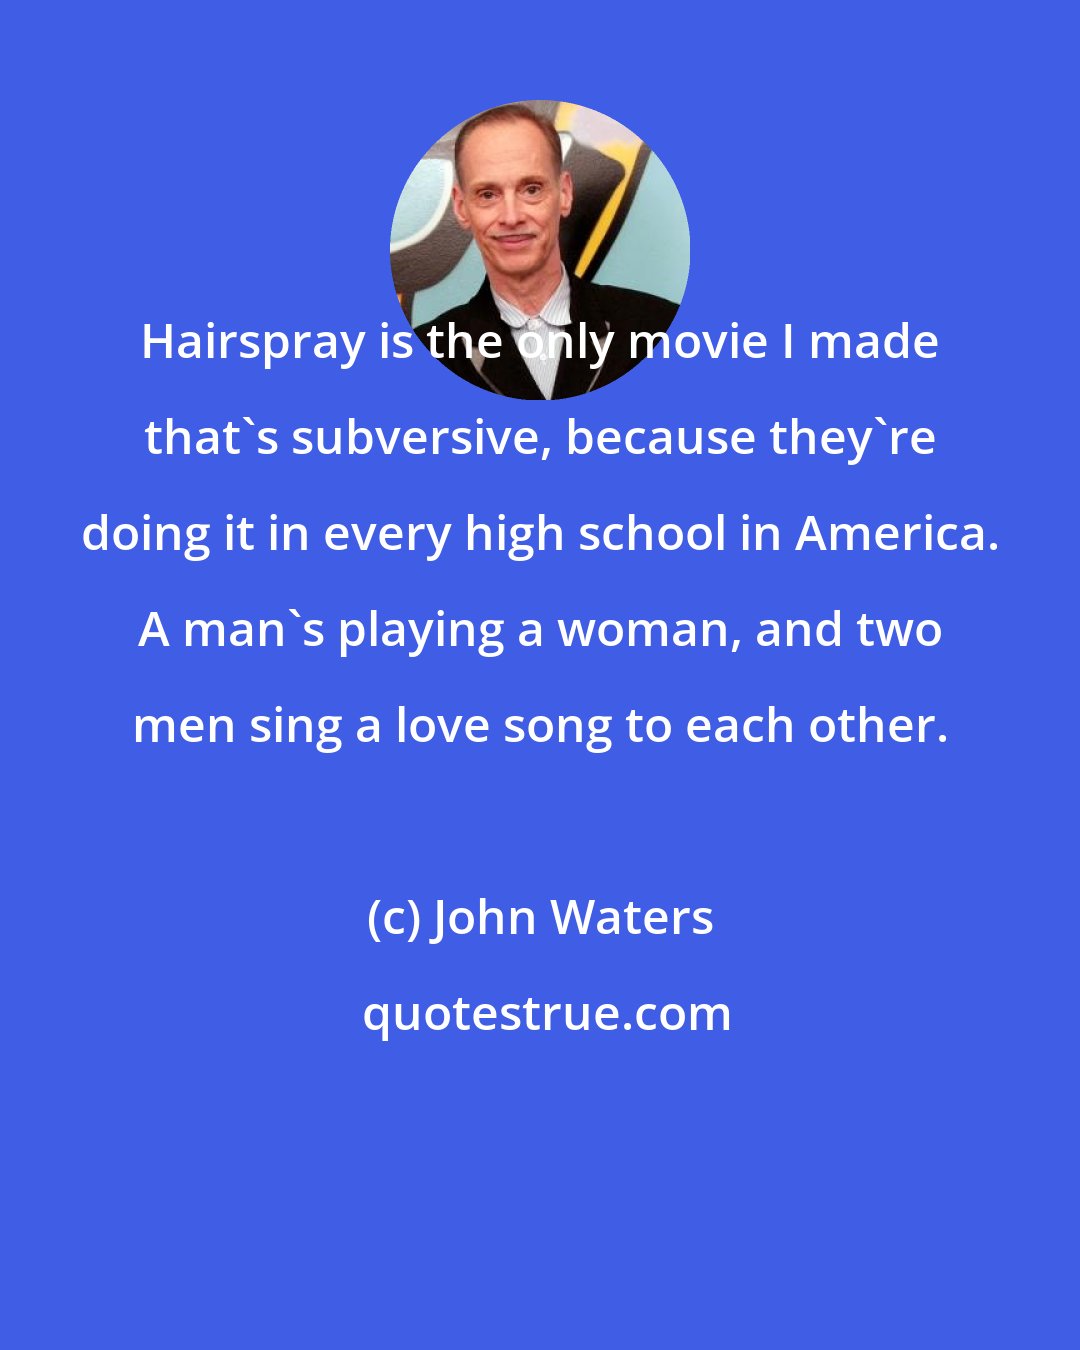 John Waters: Hairspray is the only movie I made that's subversive, because they're doing it in every high school in America. A man's playing a woman, and two men sing a love song to each other.